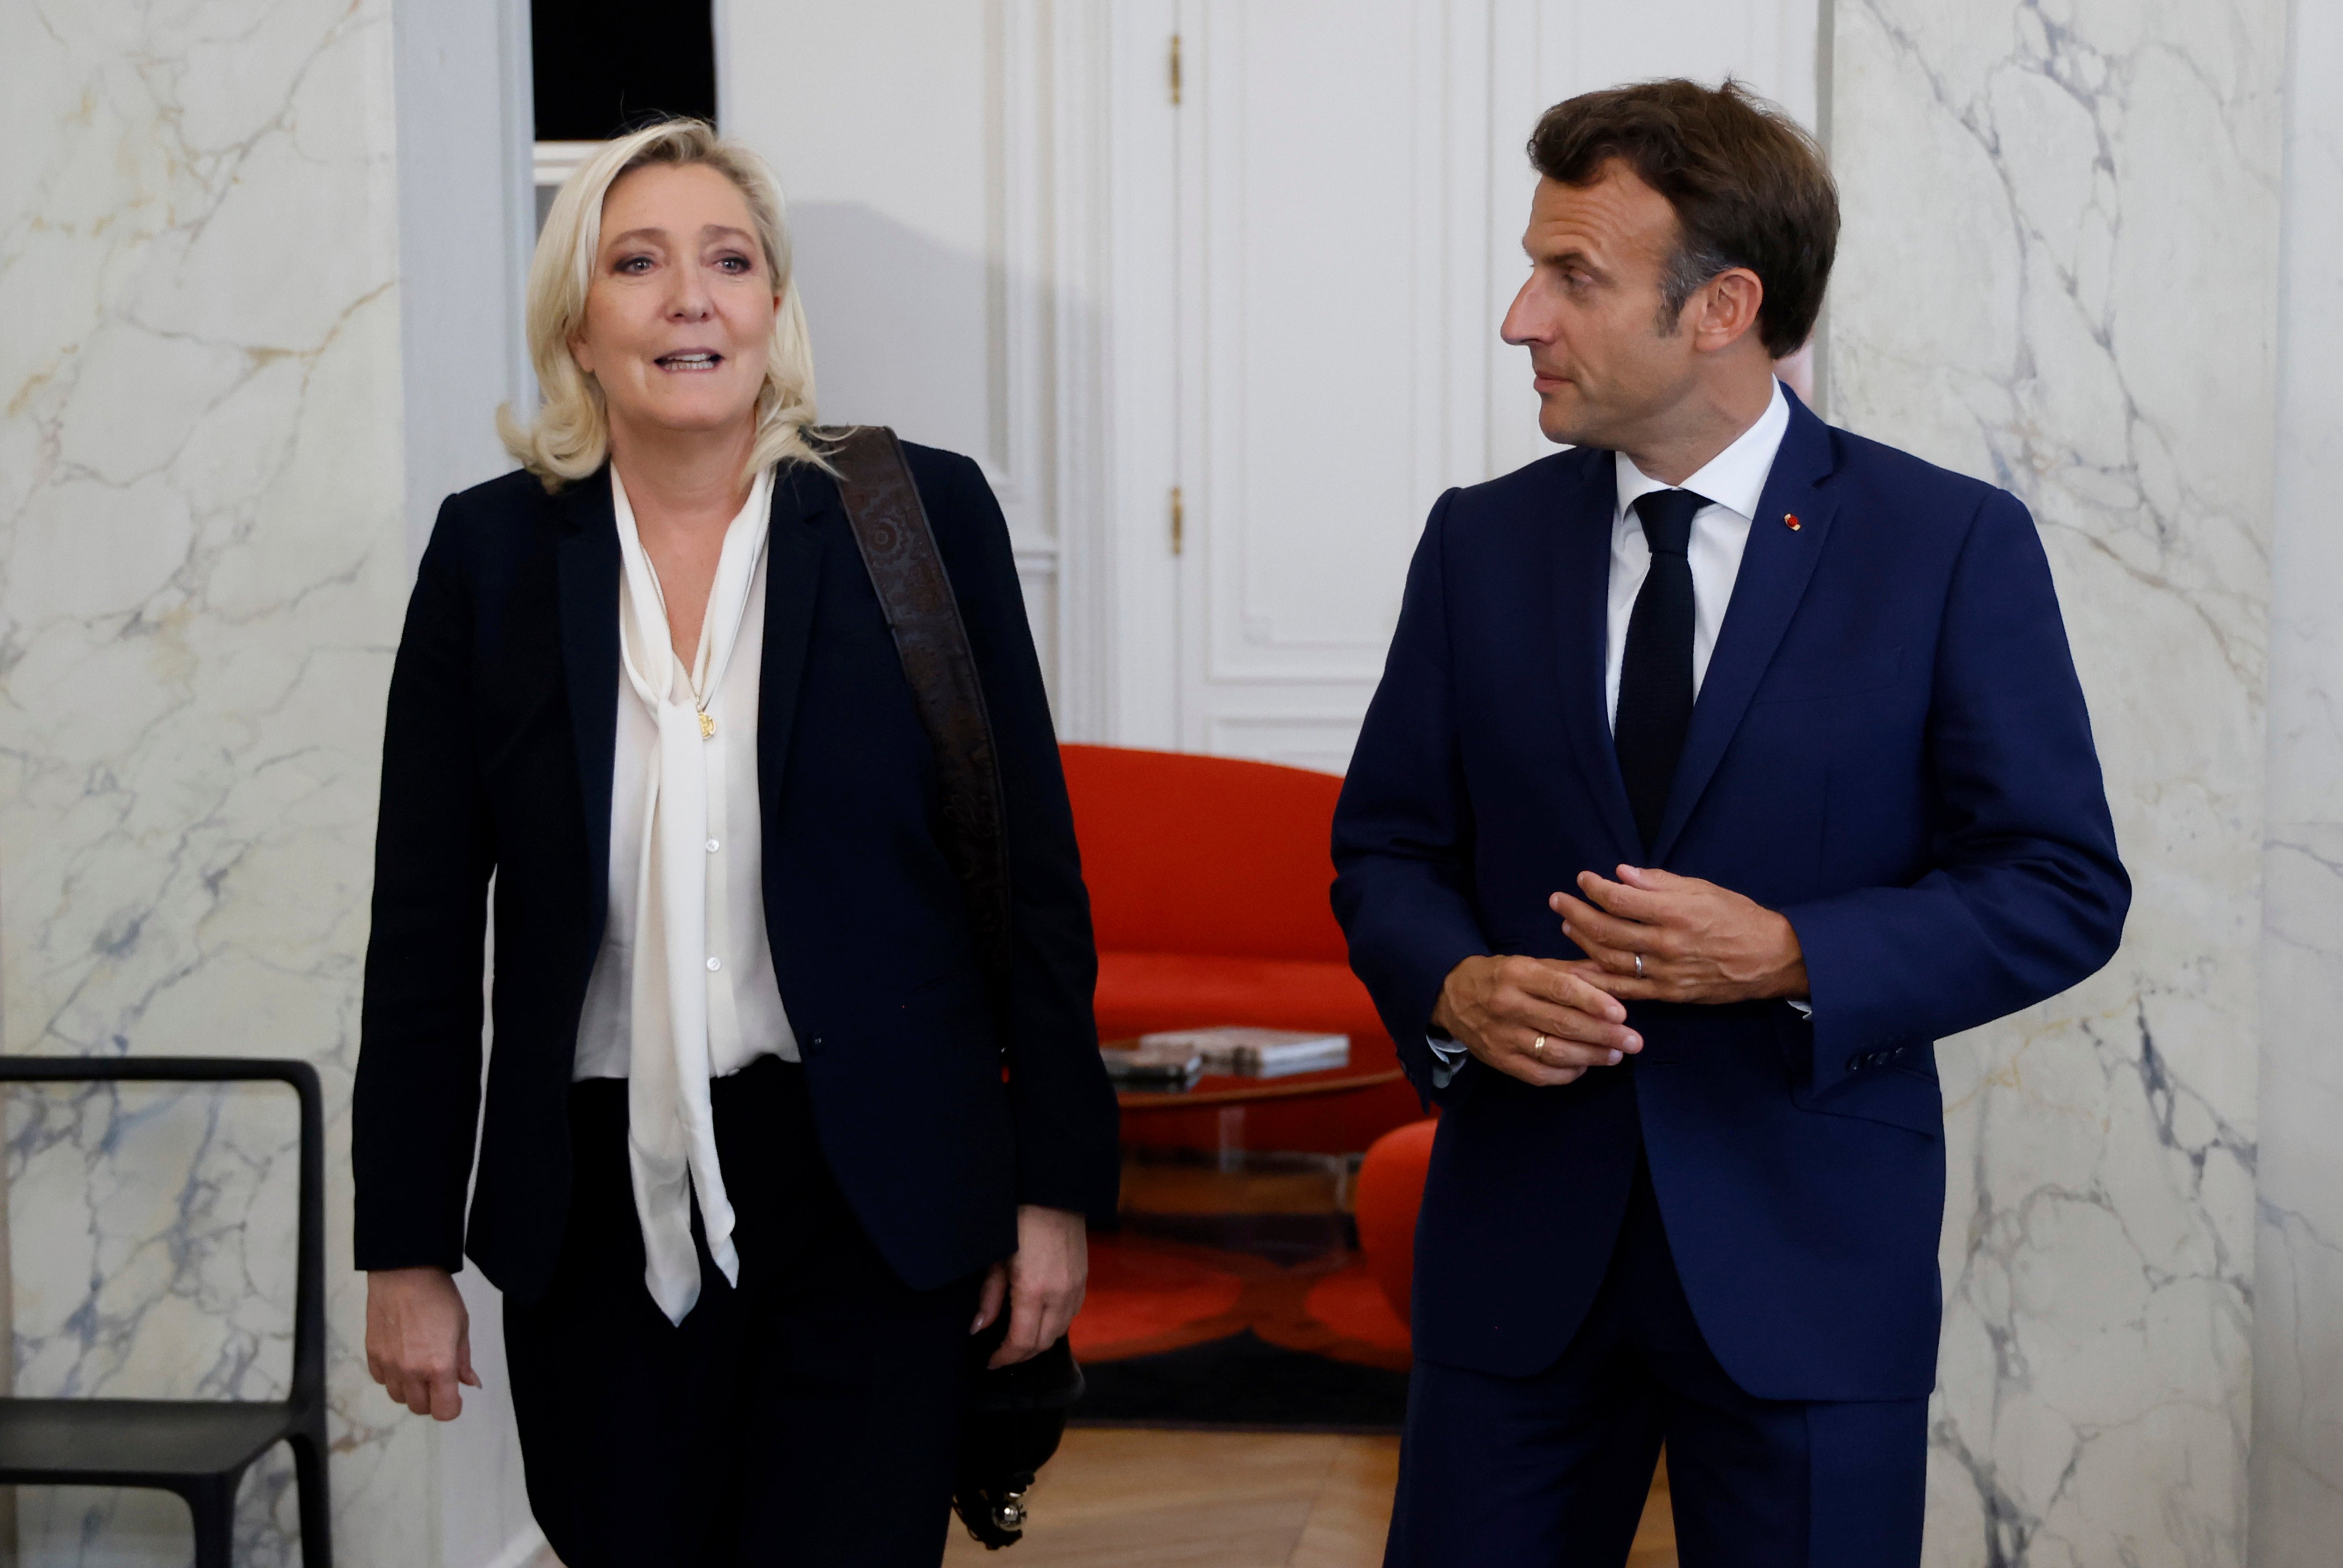 Why would Macron bring populism knocking at the door in France?